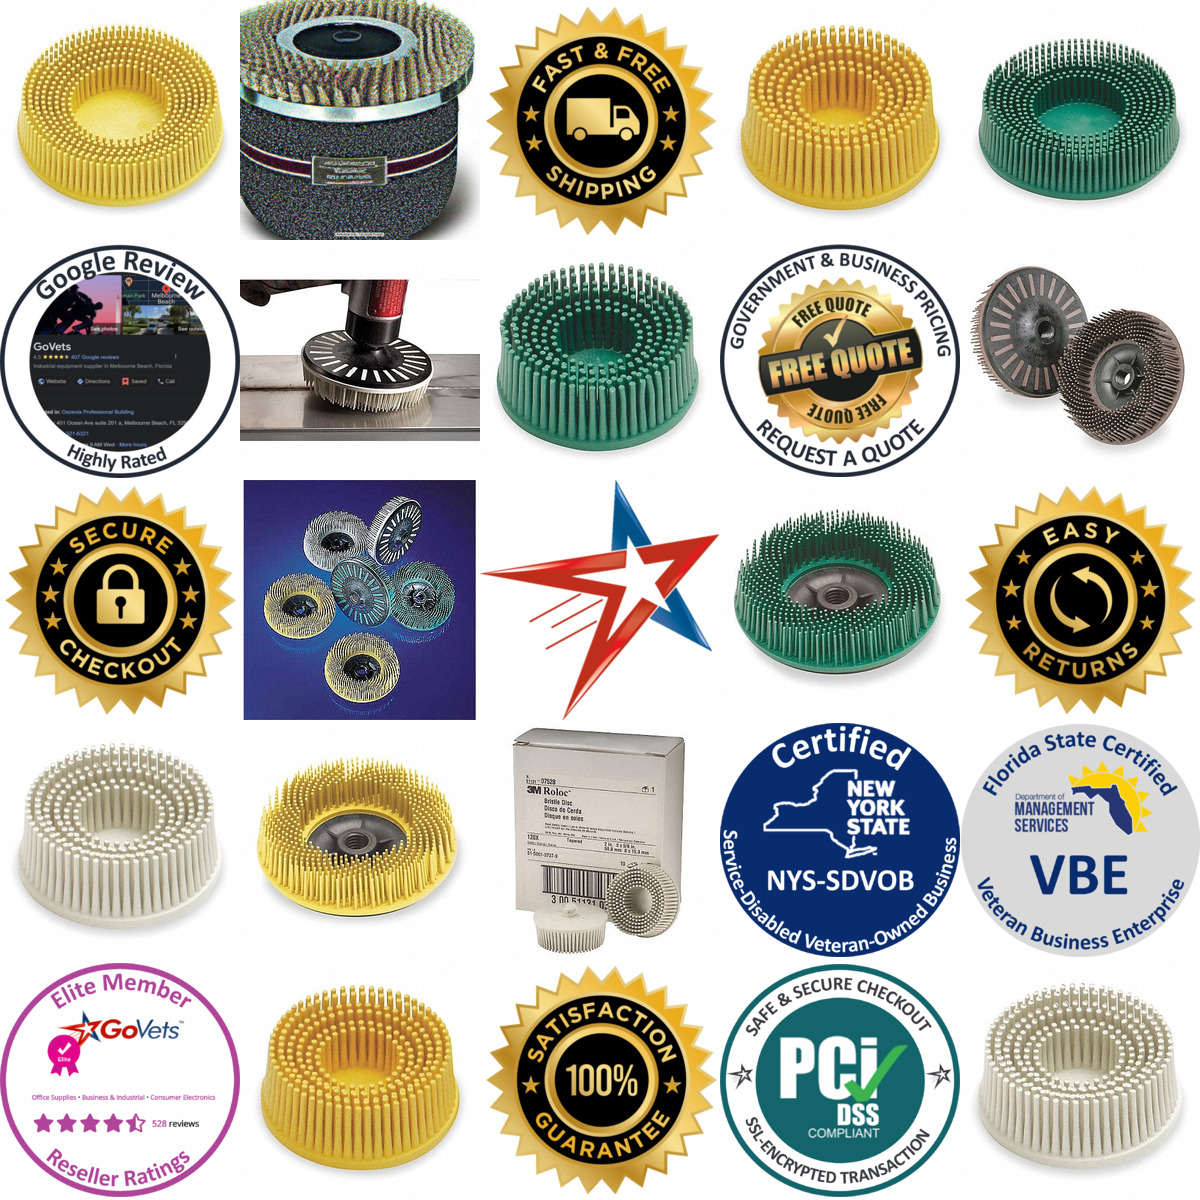 A selection of Abrasive Bristle Disc Cup Shaped products on GoVets